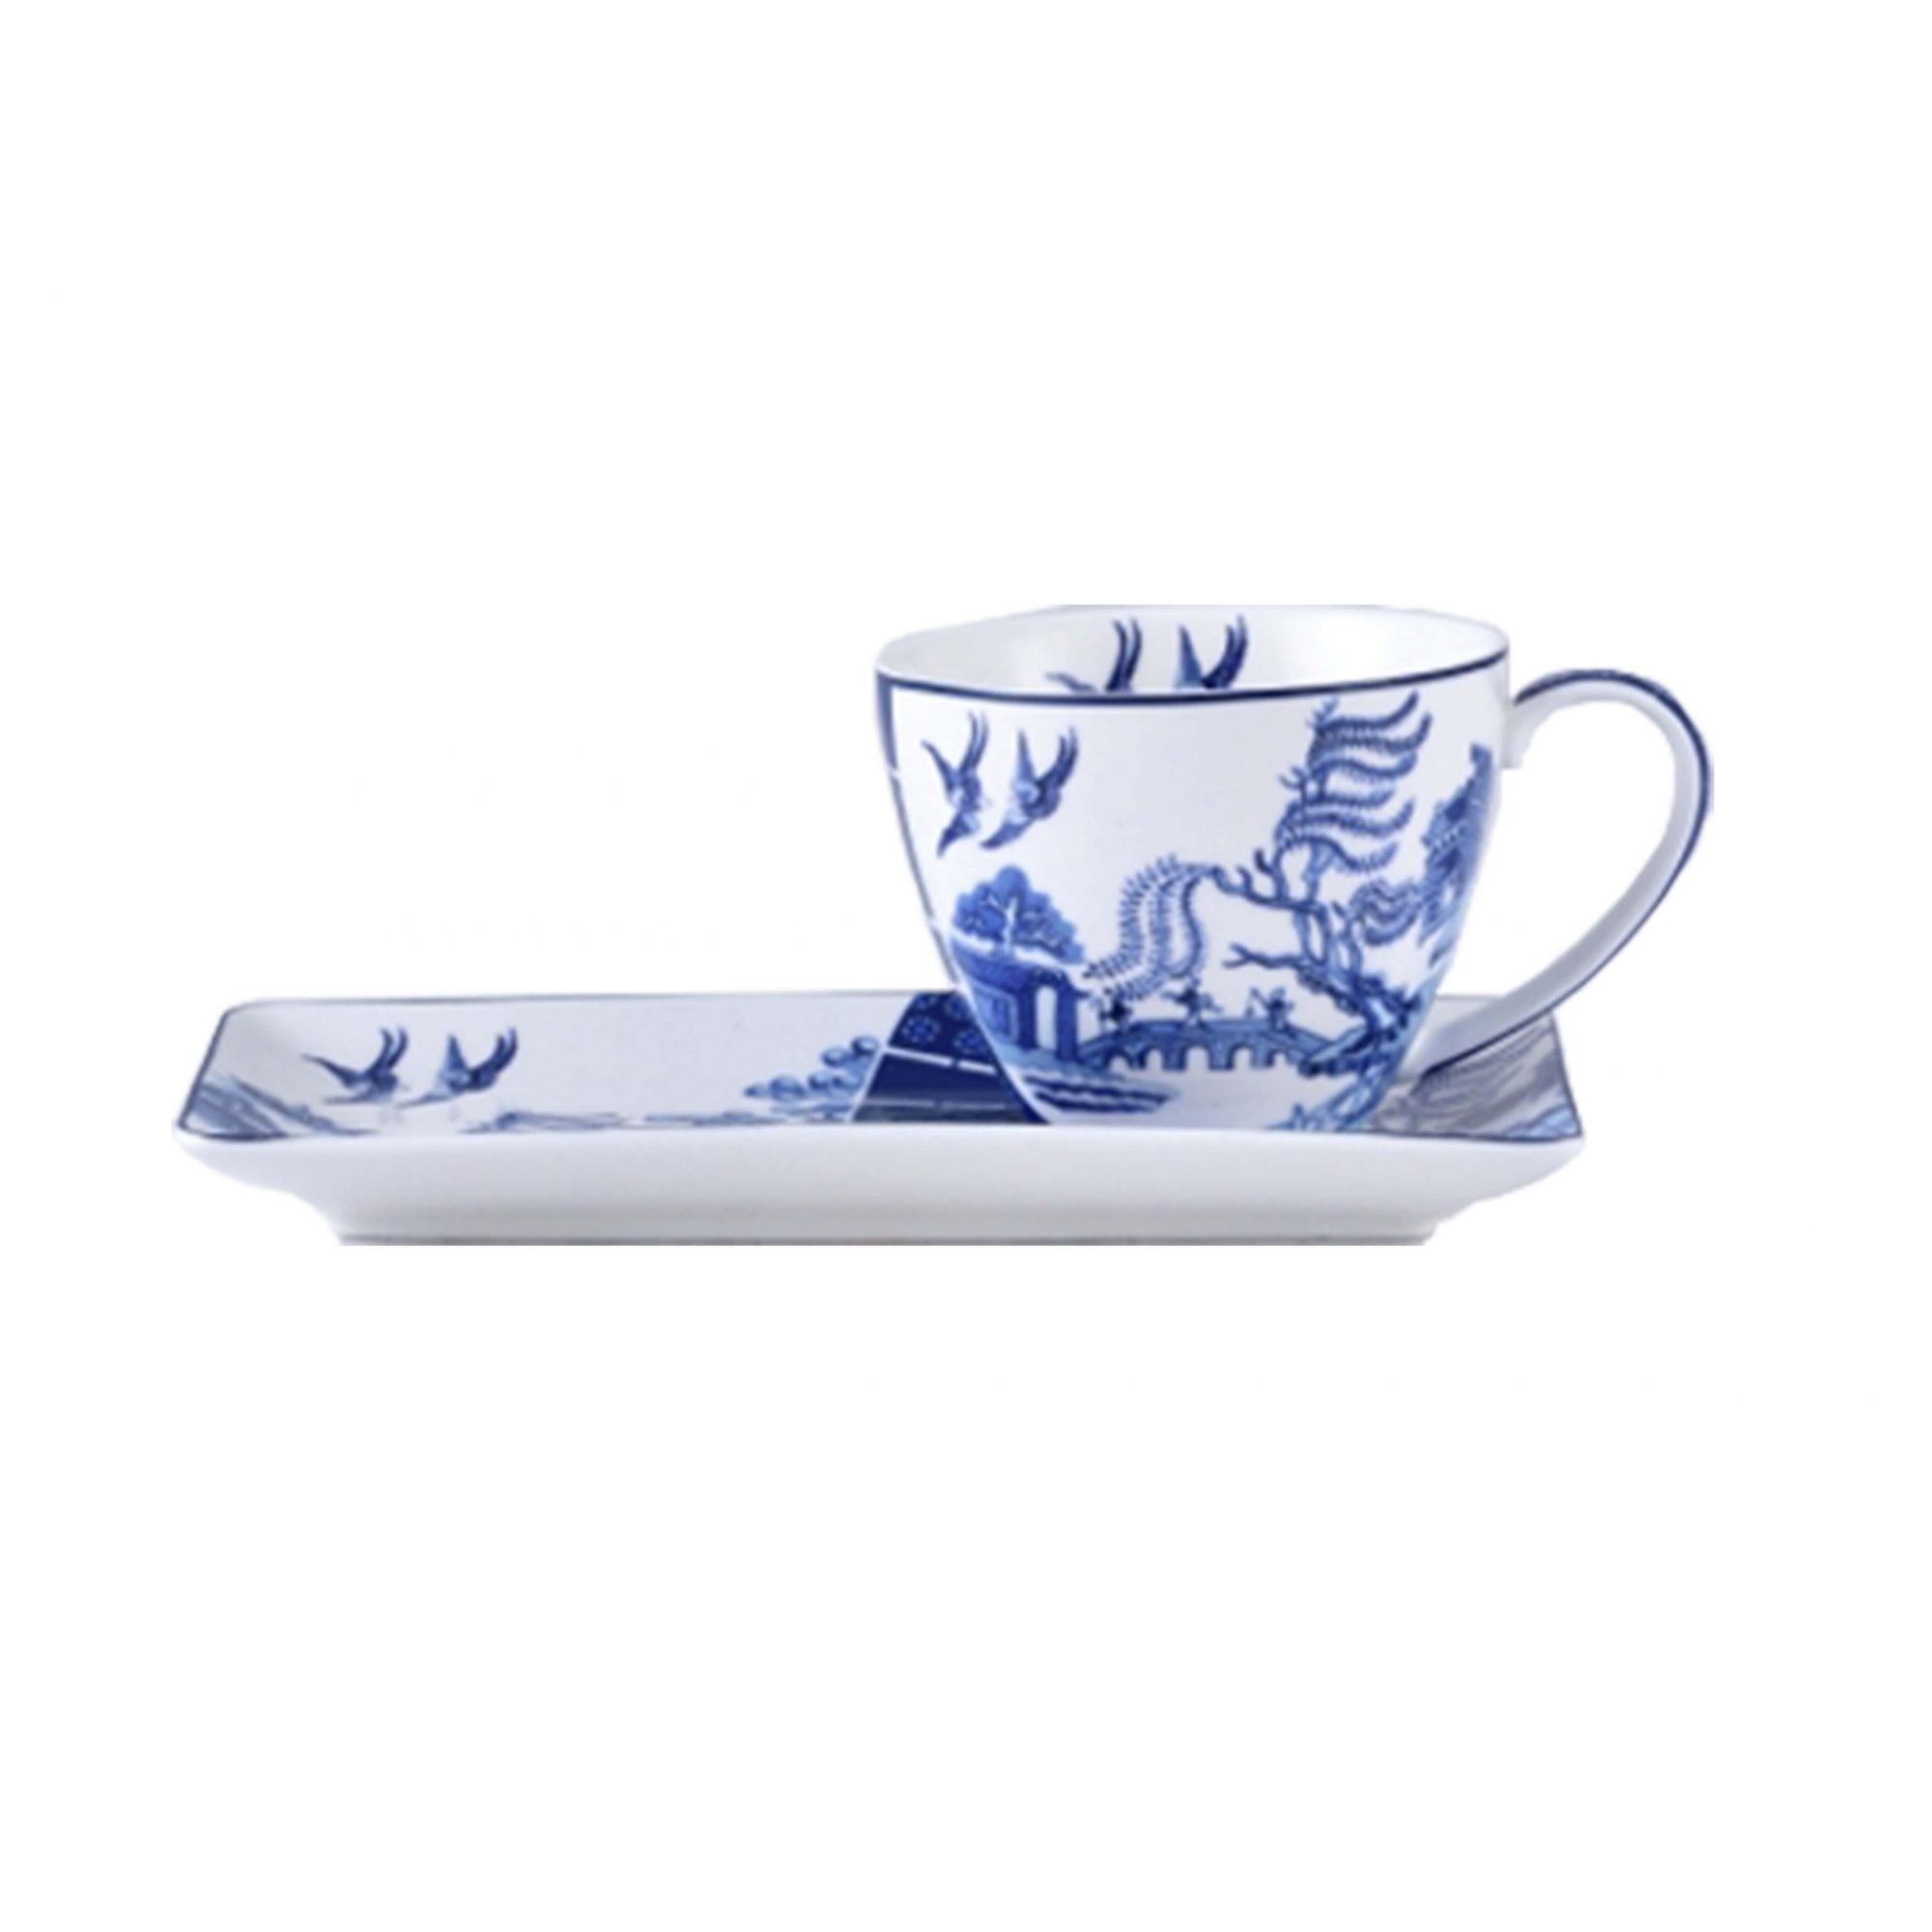 Fine Bone China Blue and White Willow Cup & Saucer Breakfast Set - 250ml 2 Piece Gift Box - Dollars and Sense